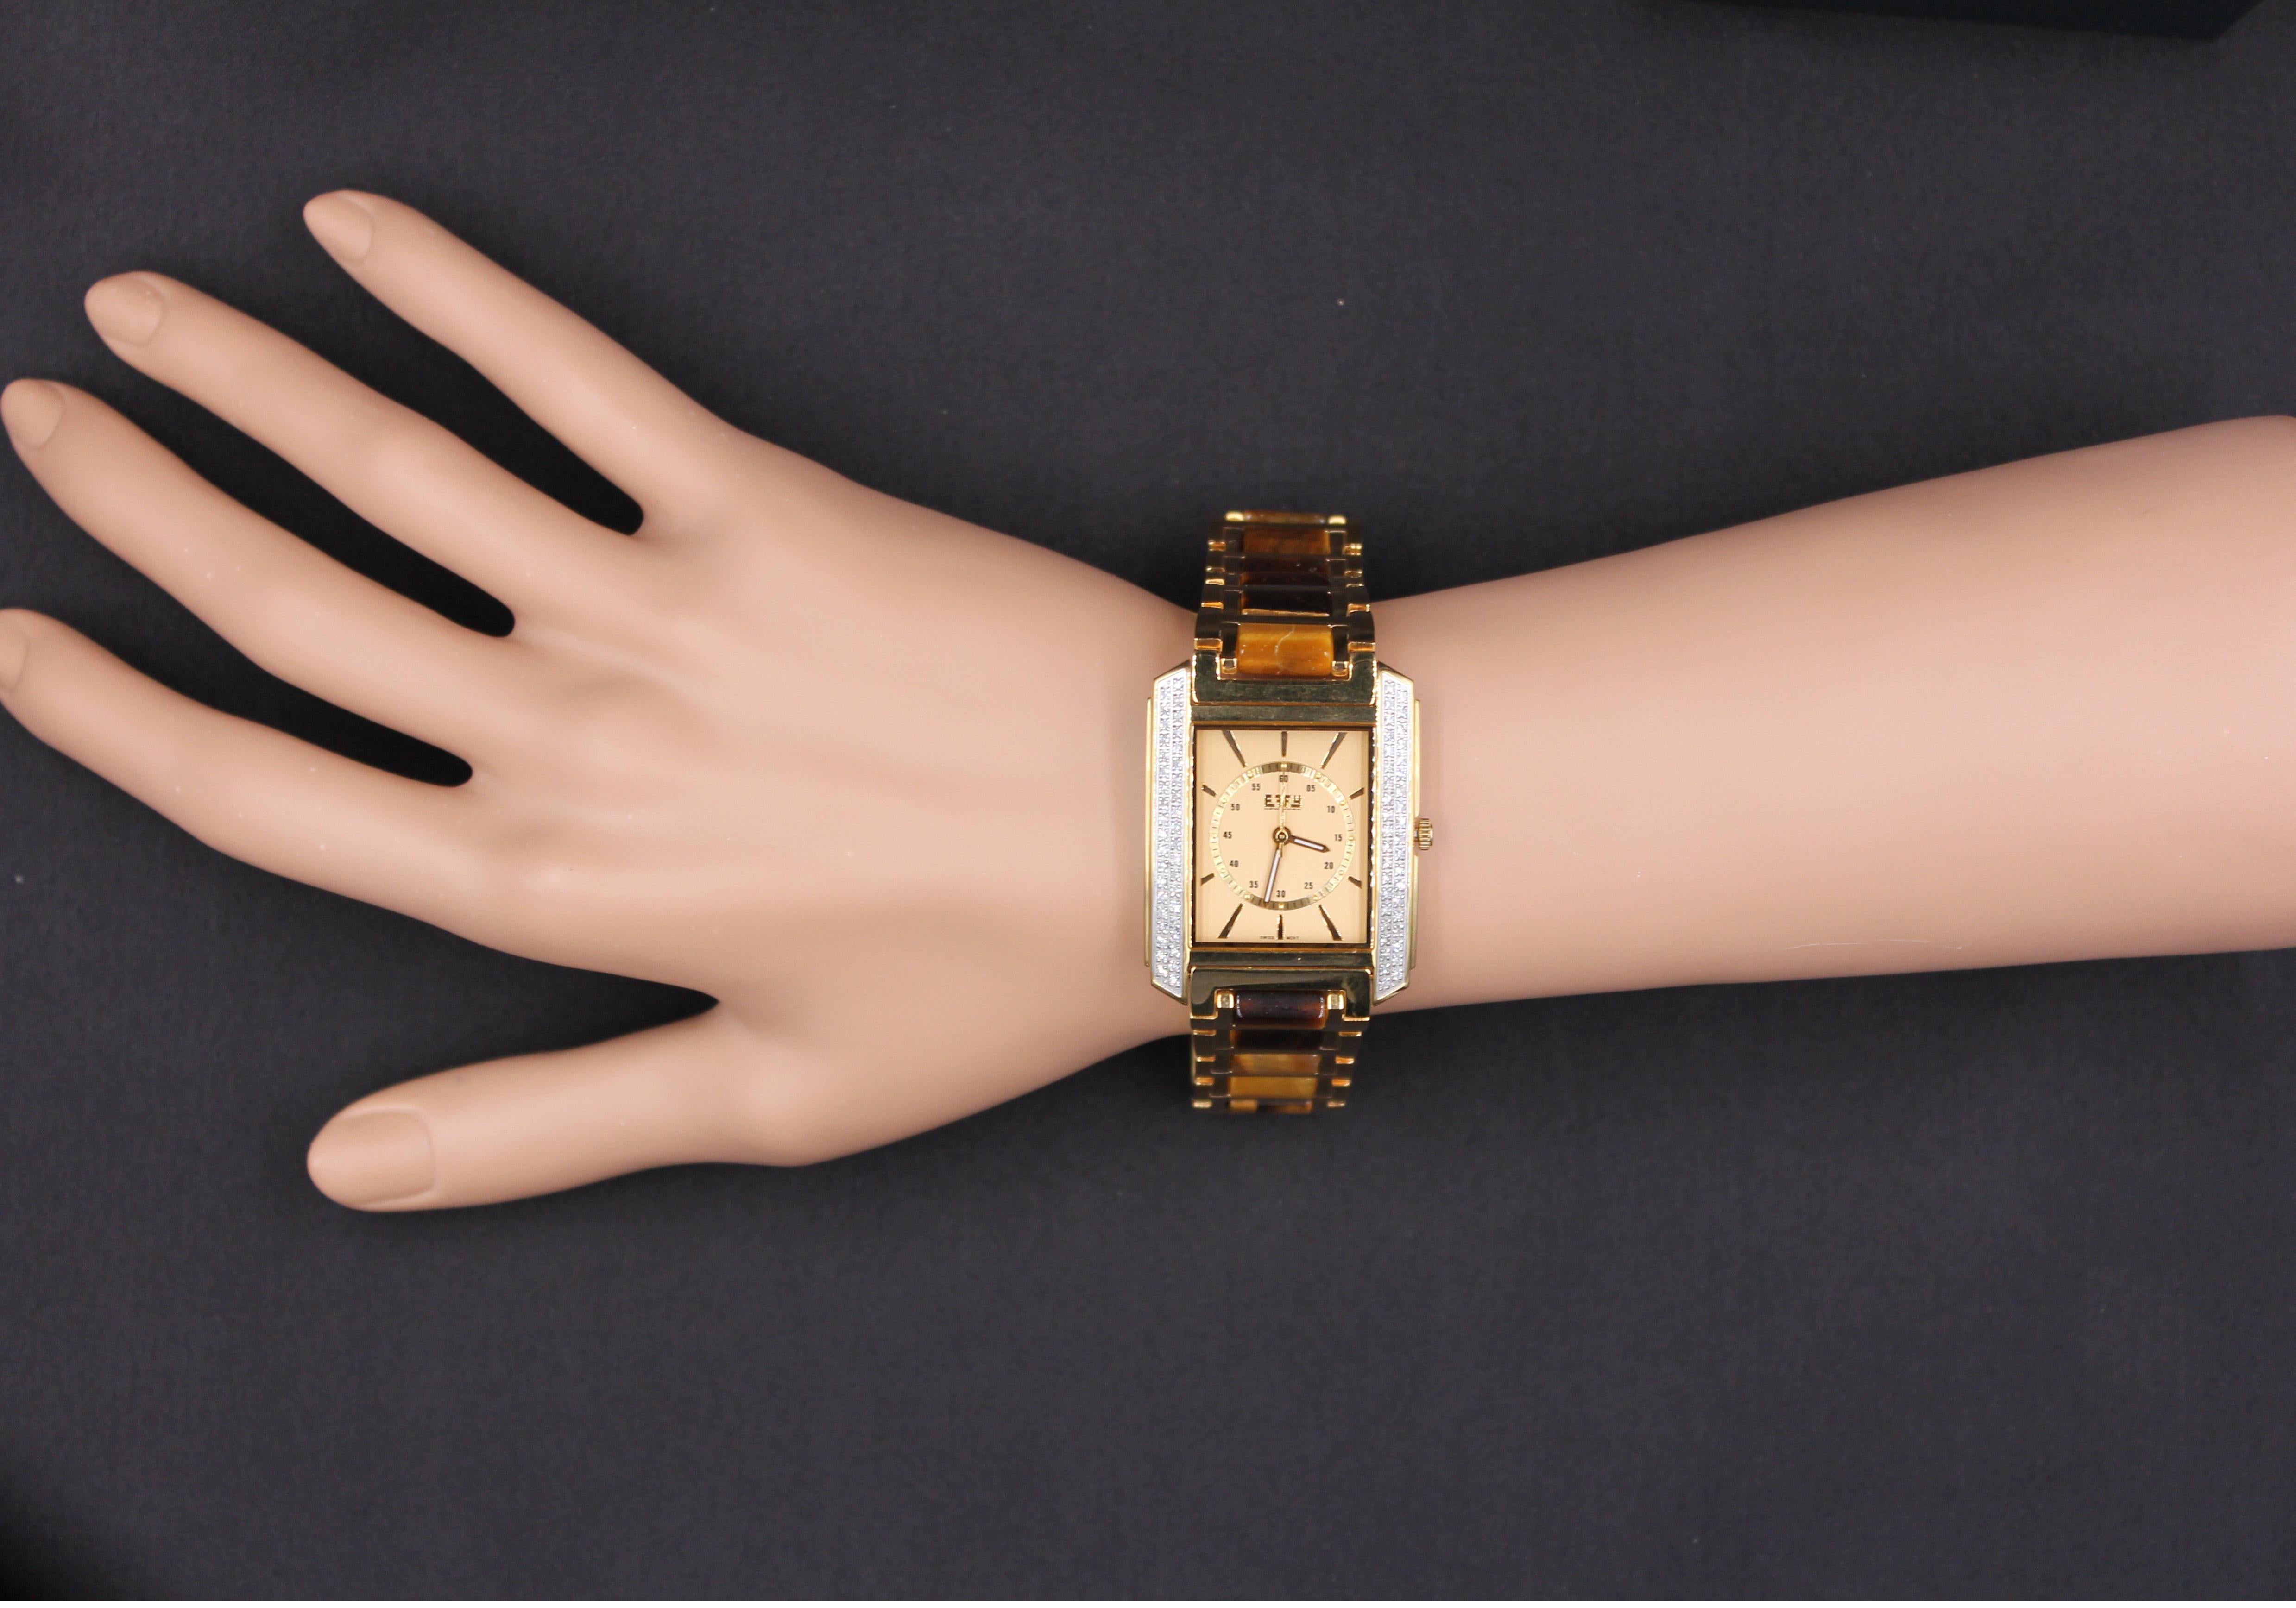 mema 22k electro gold plated watch price in pakistan